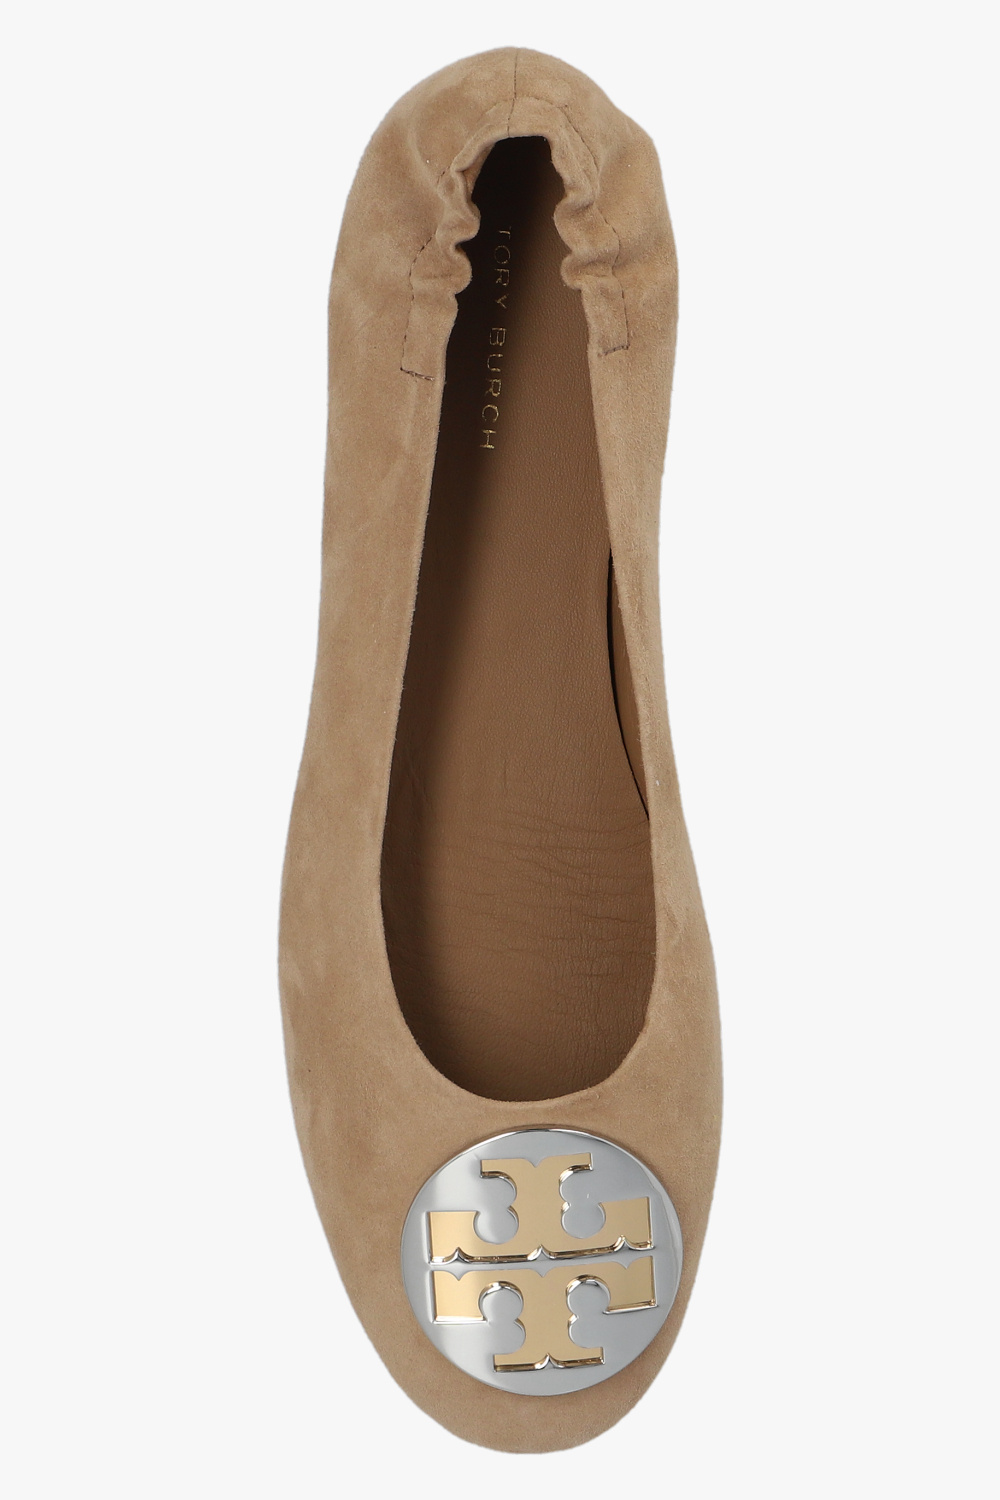 Tory Burch ‘Claire’ suede ballet flats